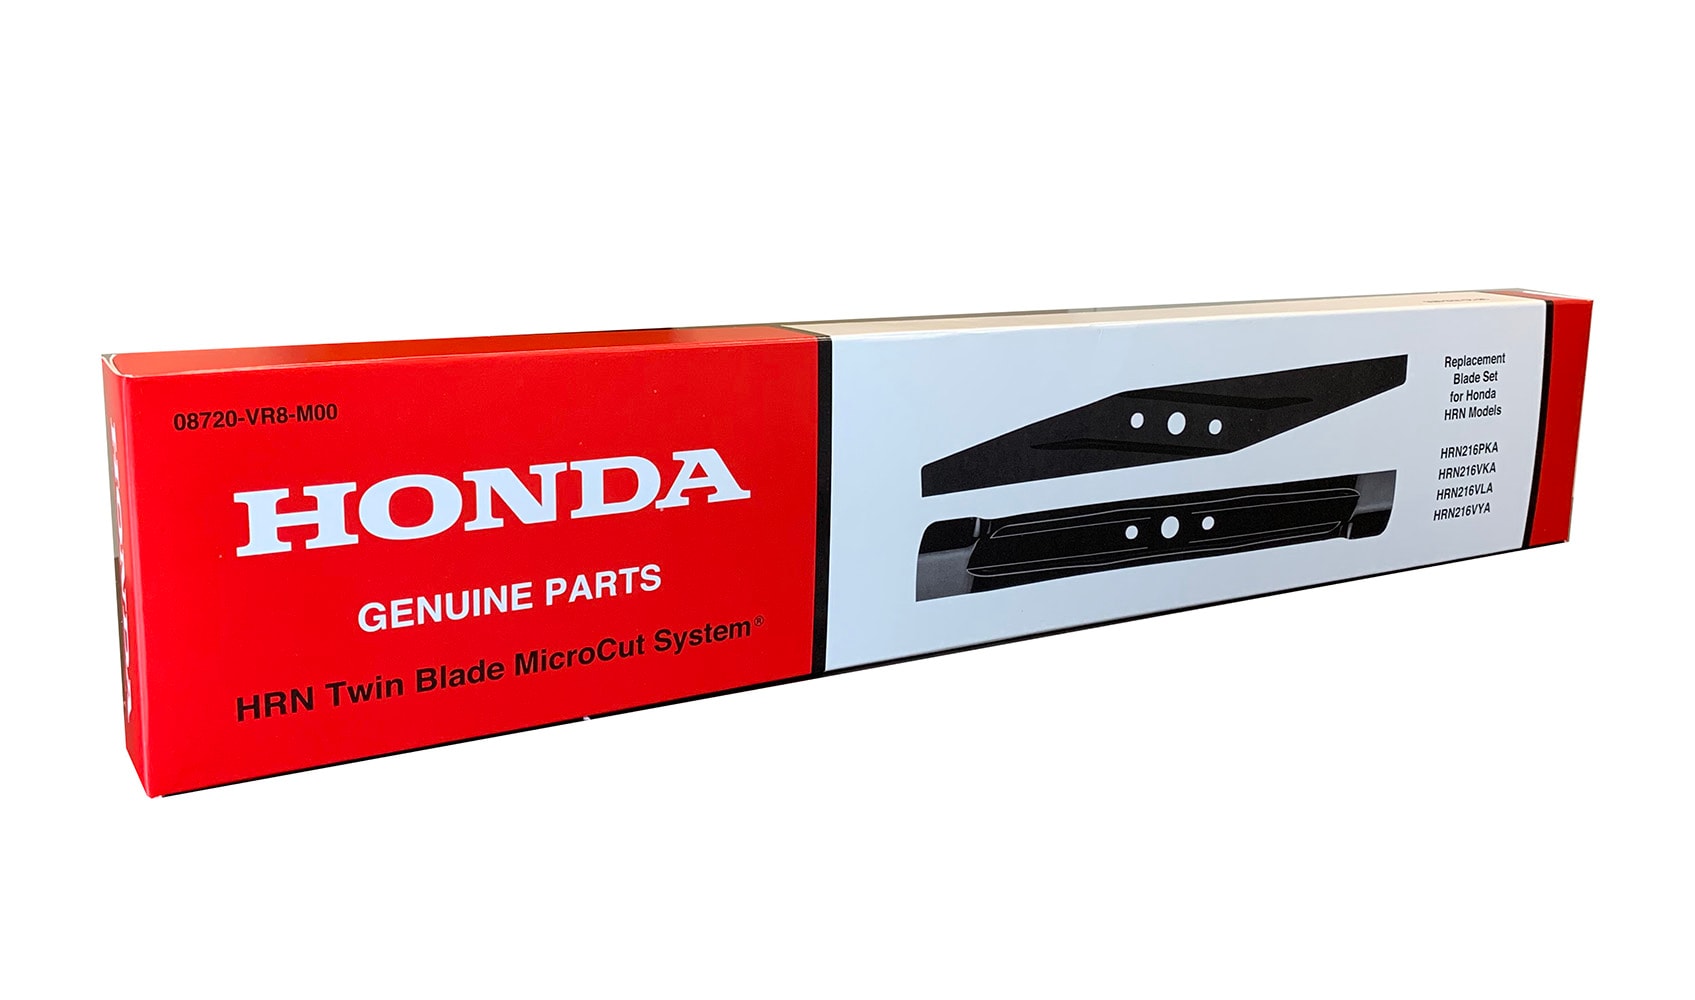 Honda, Mower Parts and Accessories